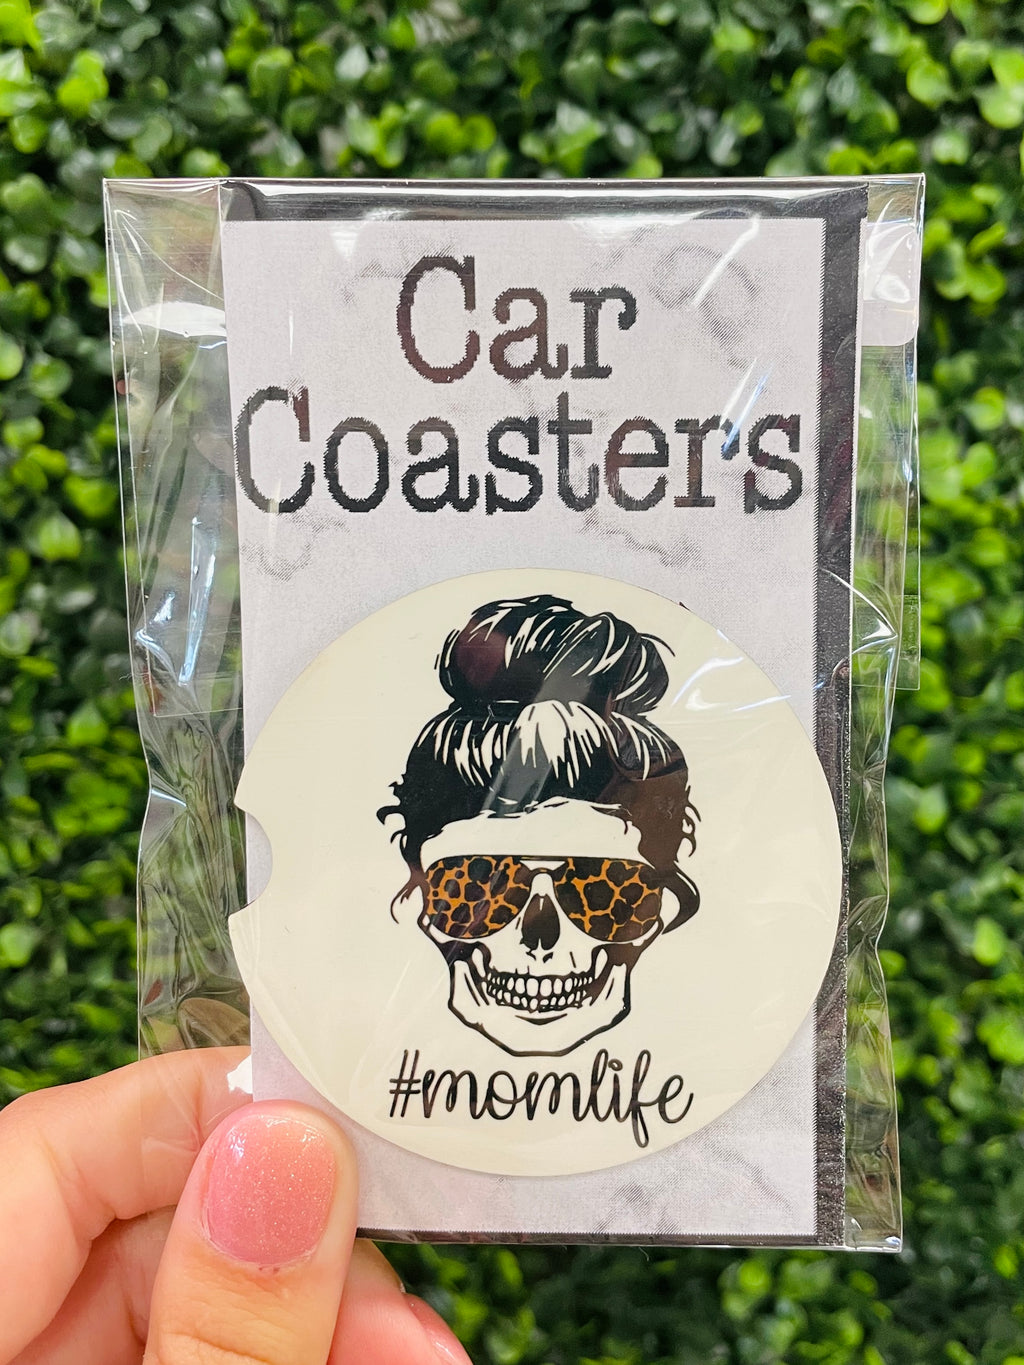 Show off your #MomLife pride with this hilarious car coaster! Featuring a skeleton and messy bun design, it's perfect for any mom on the go. Practical and fun, it makes a great gift for any weary momma needing surviving and thriving . #MomLife never looked better.